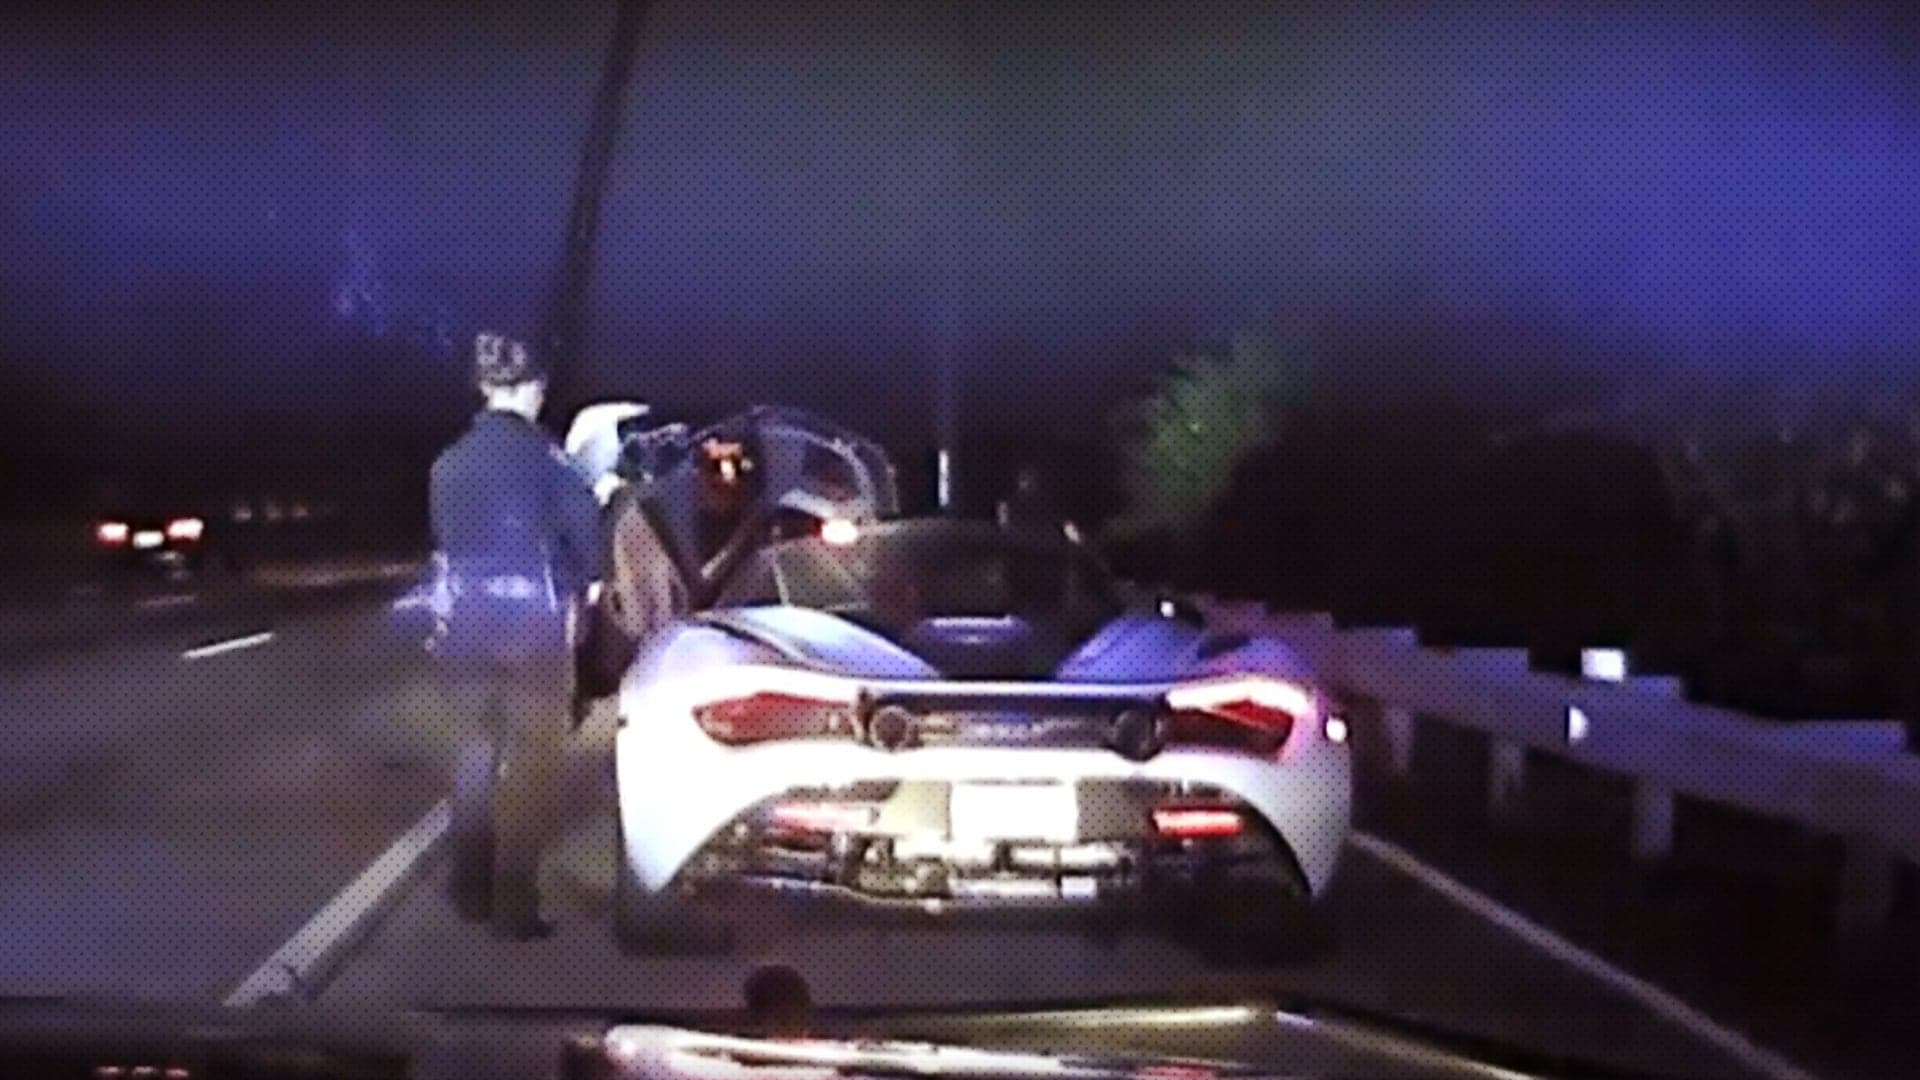 Police Officer Hits 143 MPH in Chevy Impala While Chasing Drunk McLaren 720S Driver [UPDATED]